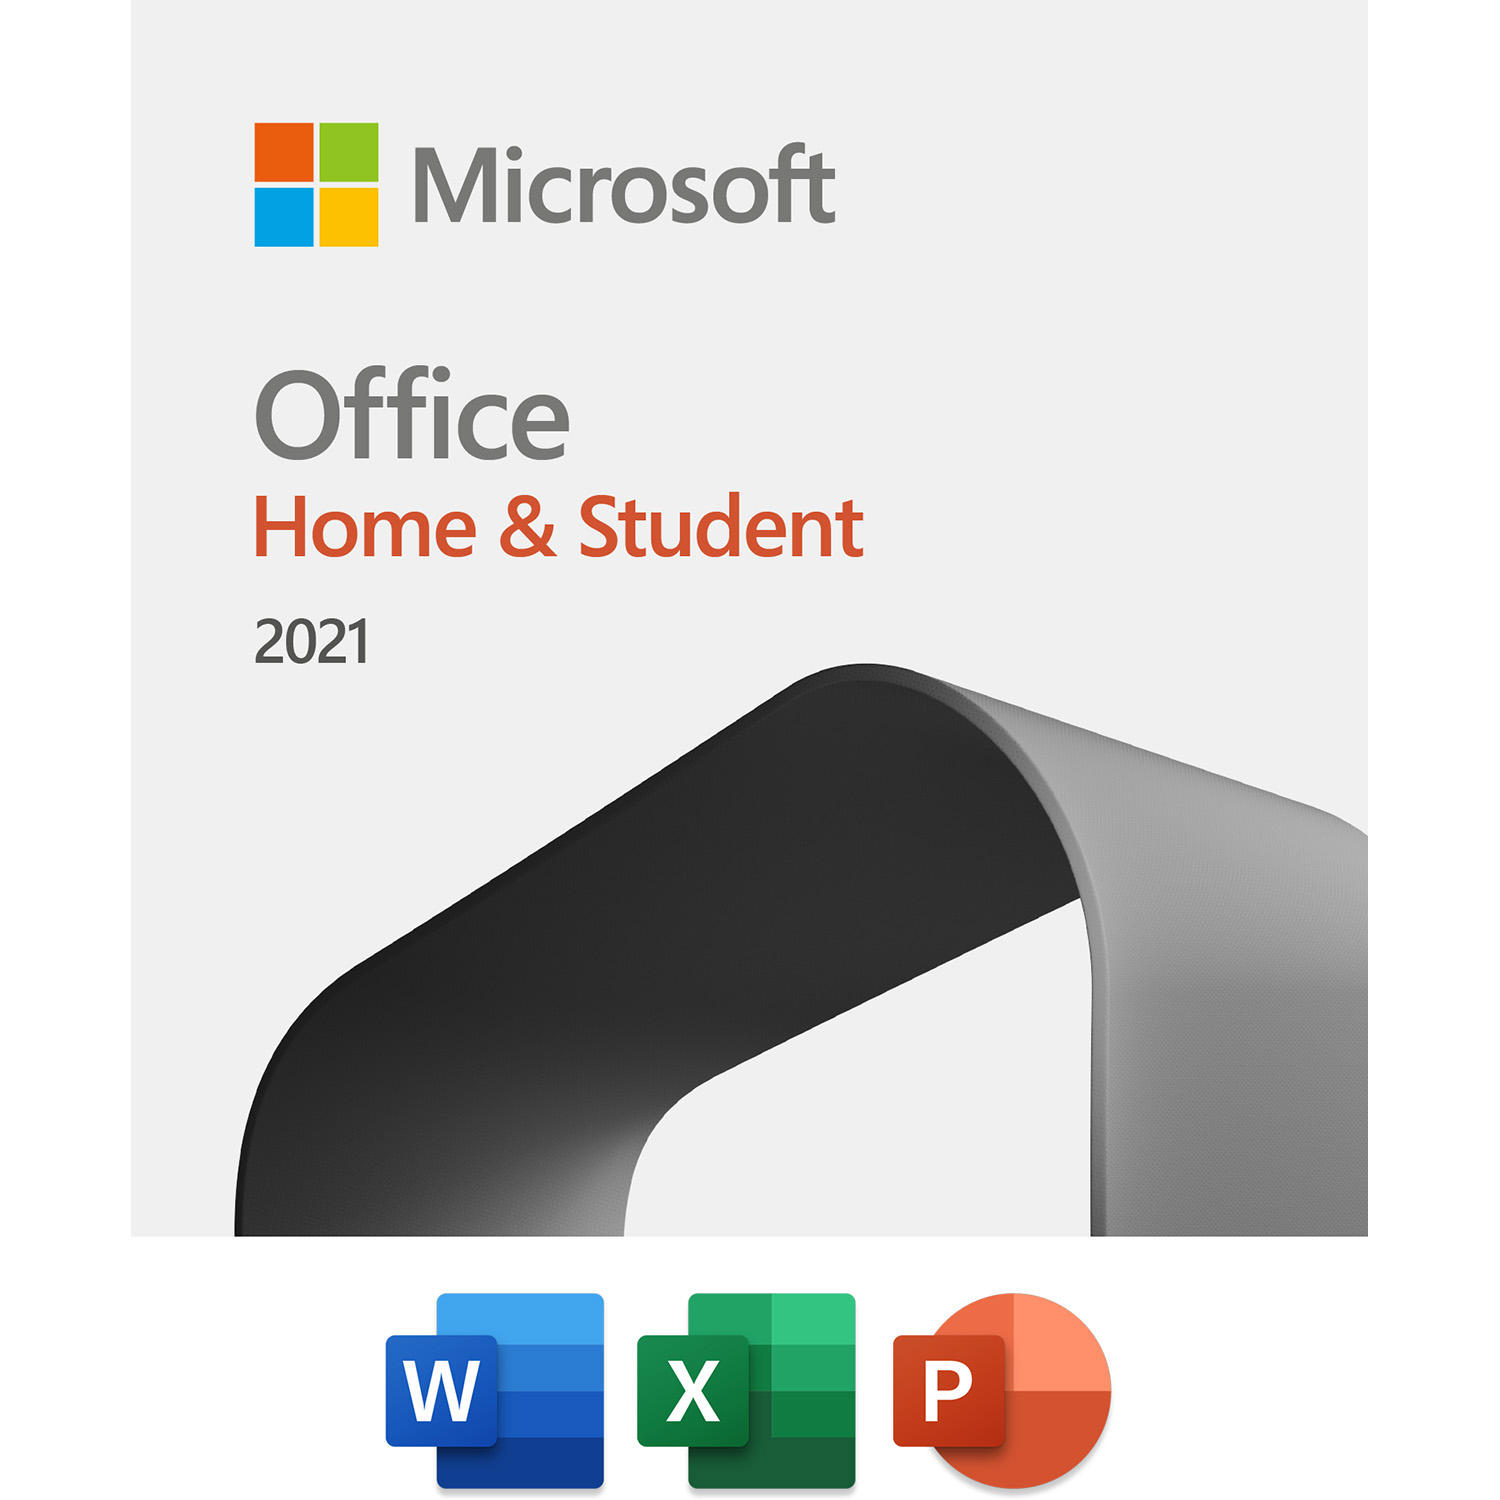 Microsoft Office Home & Student 2021 One-time purchase for 1 PC or Mac Download